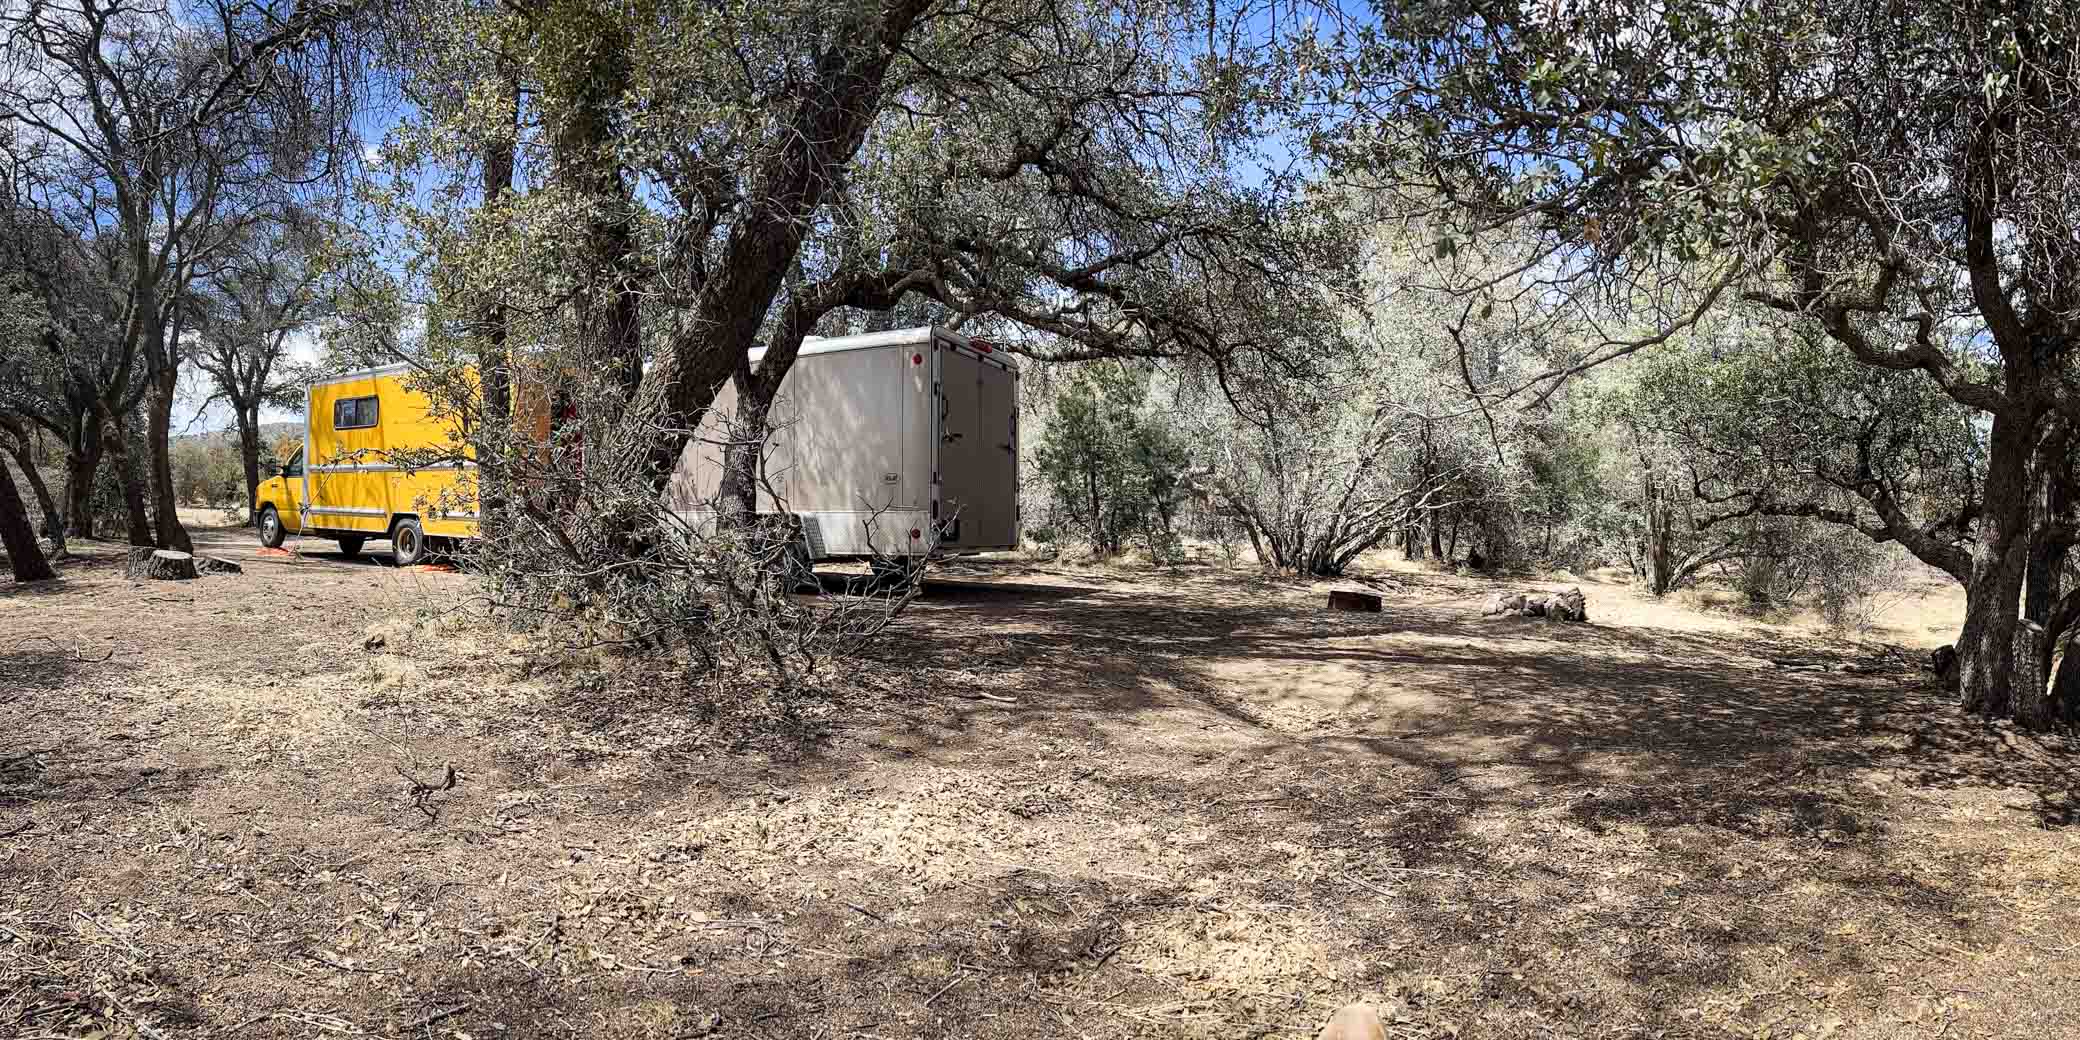 Camped at Chisom Trail Trailhead, White Signal NM, March 31, 2022